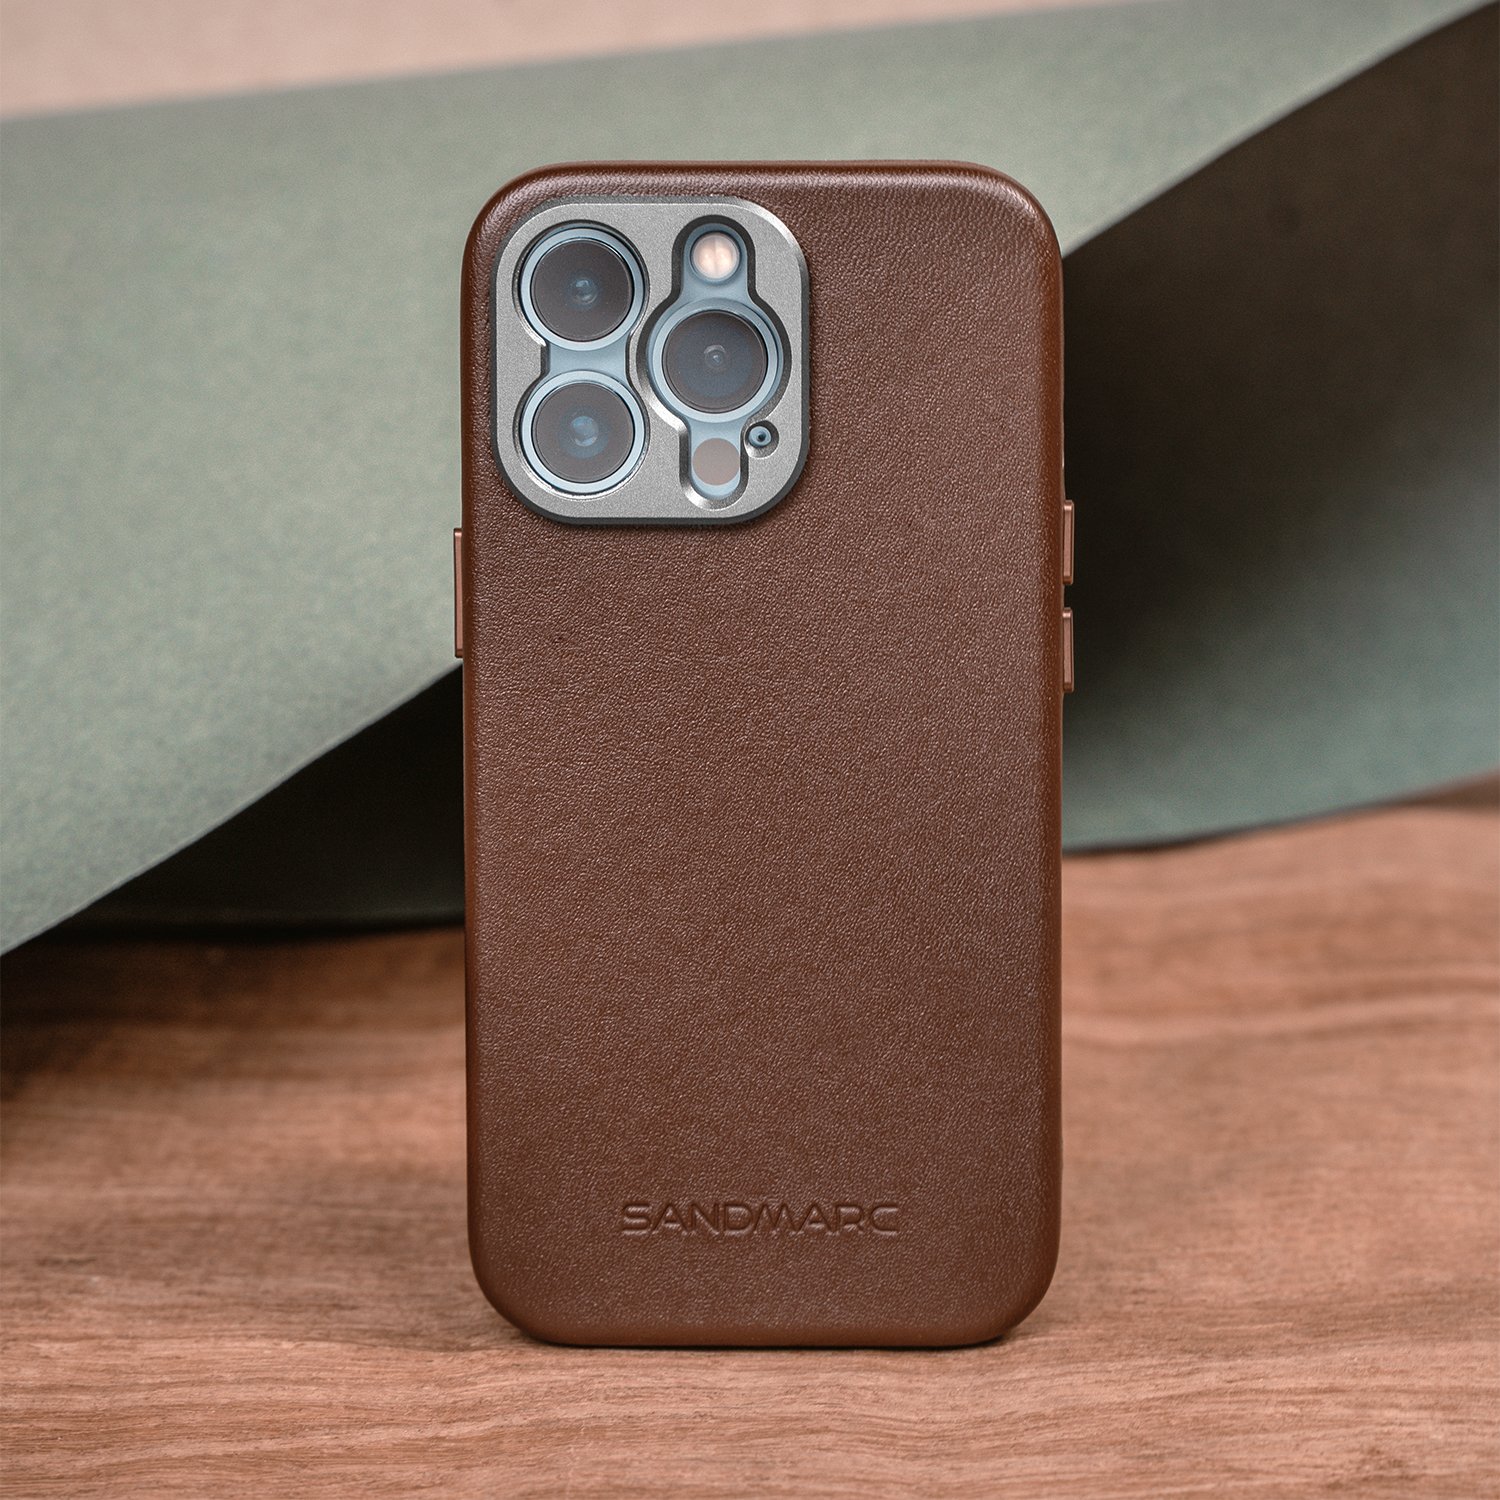 iPhone 13 Pro: opt for leather cases and covers